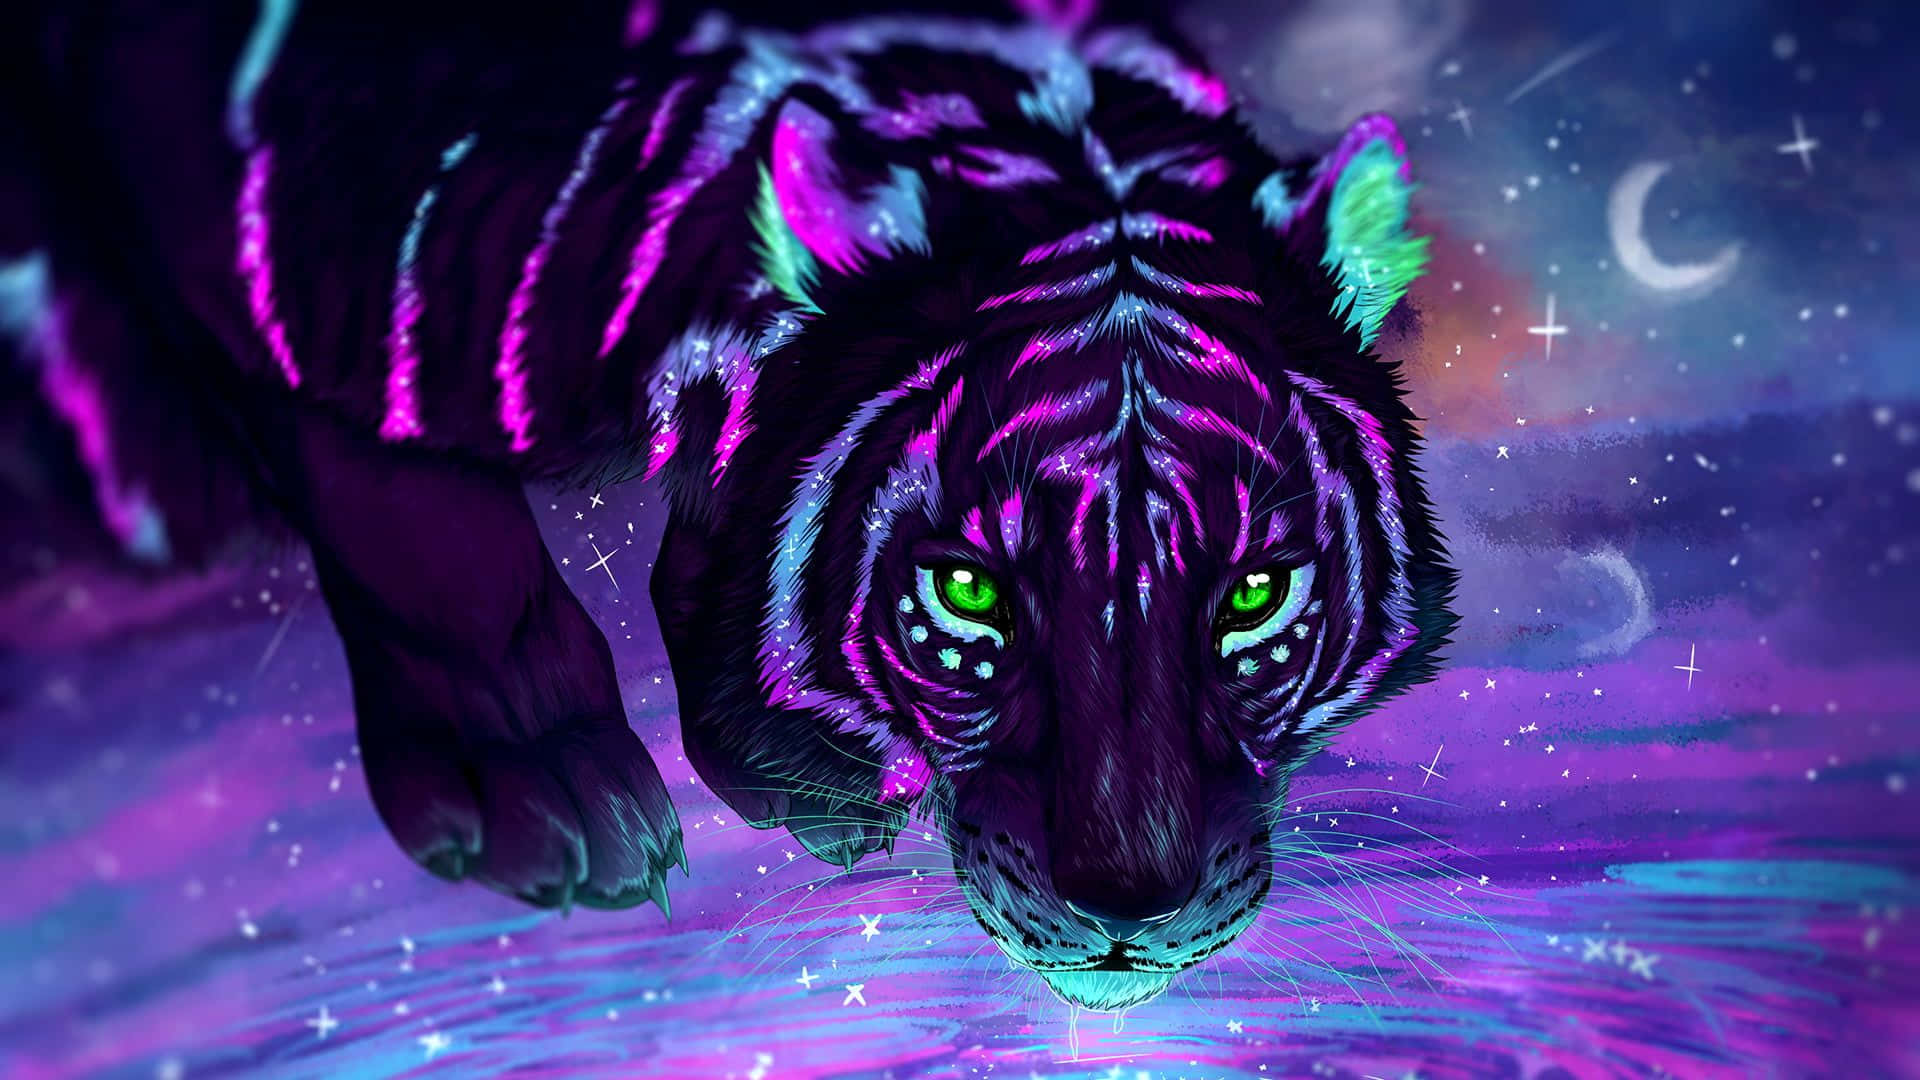 Get lost in the Cool Animal Galaxy! Wallpaper